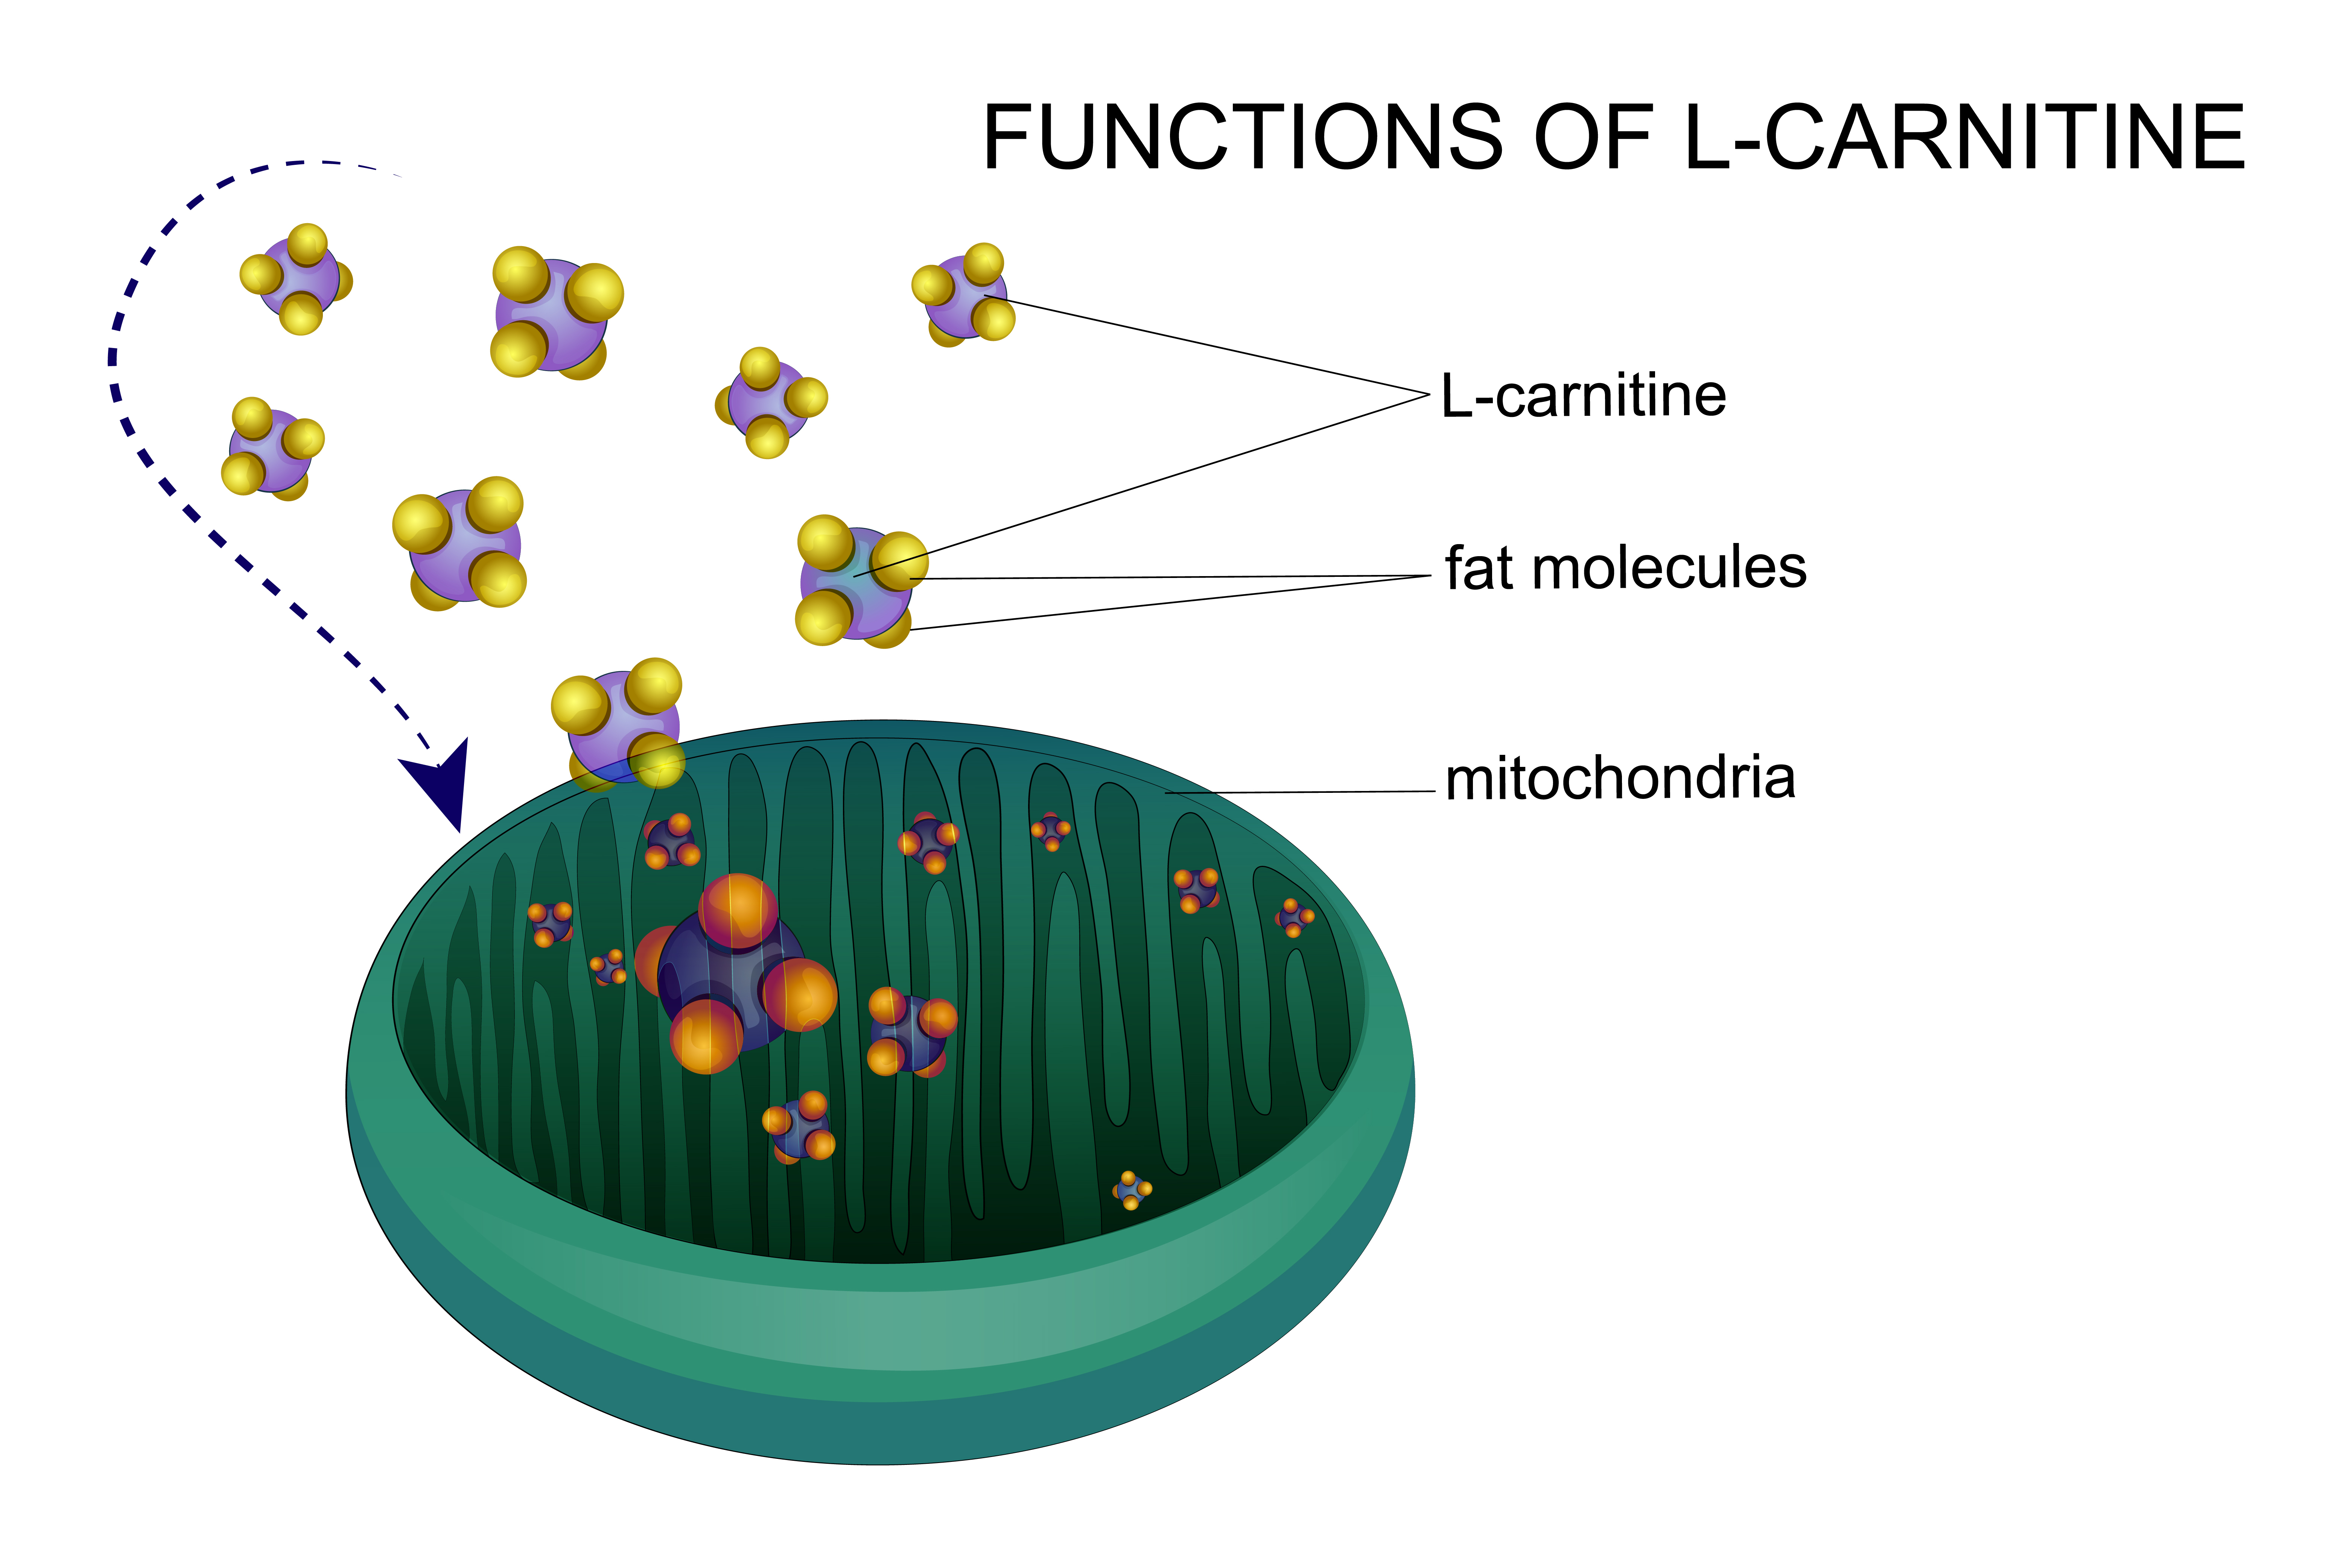 The basic function of carnitine is transport of fat compounds inside mitochondria cells.